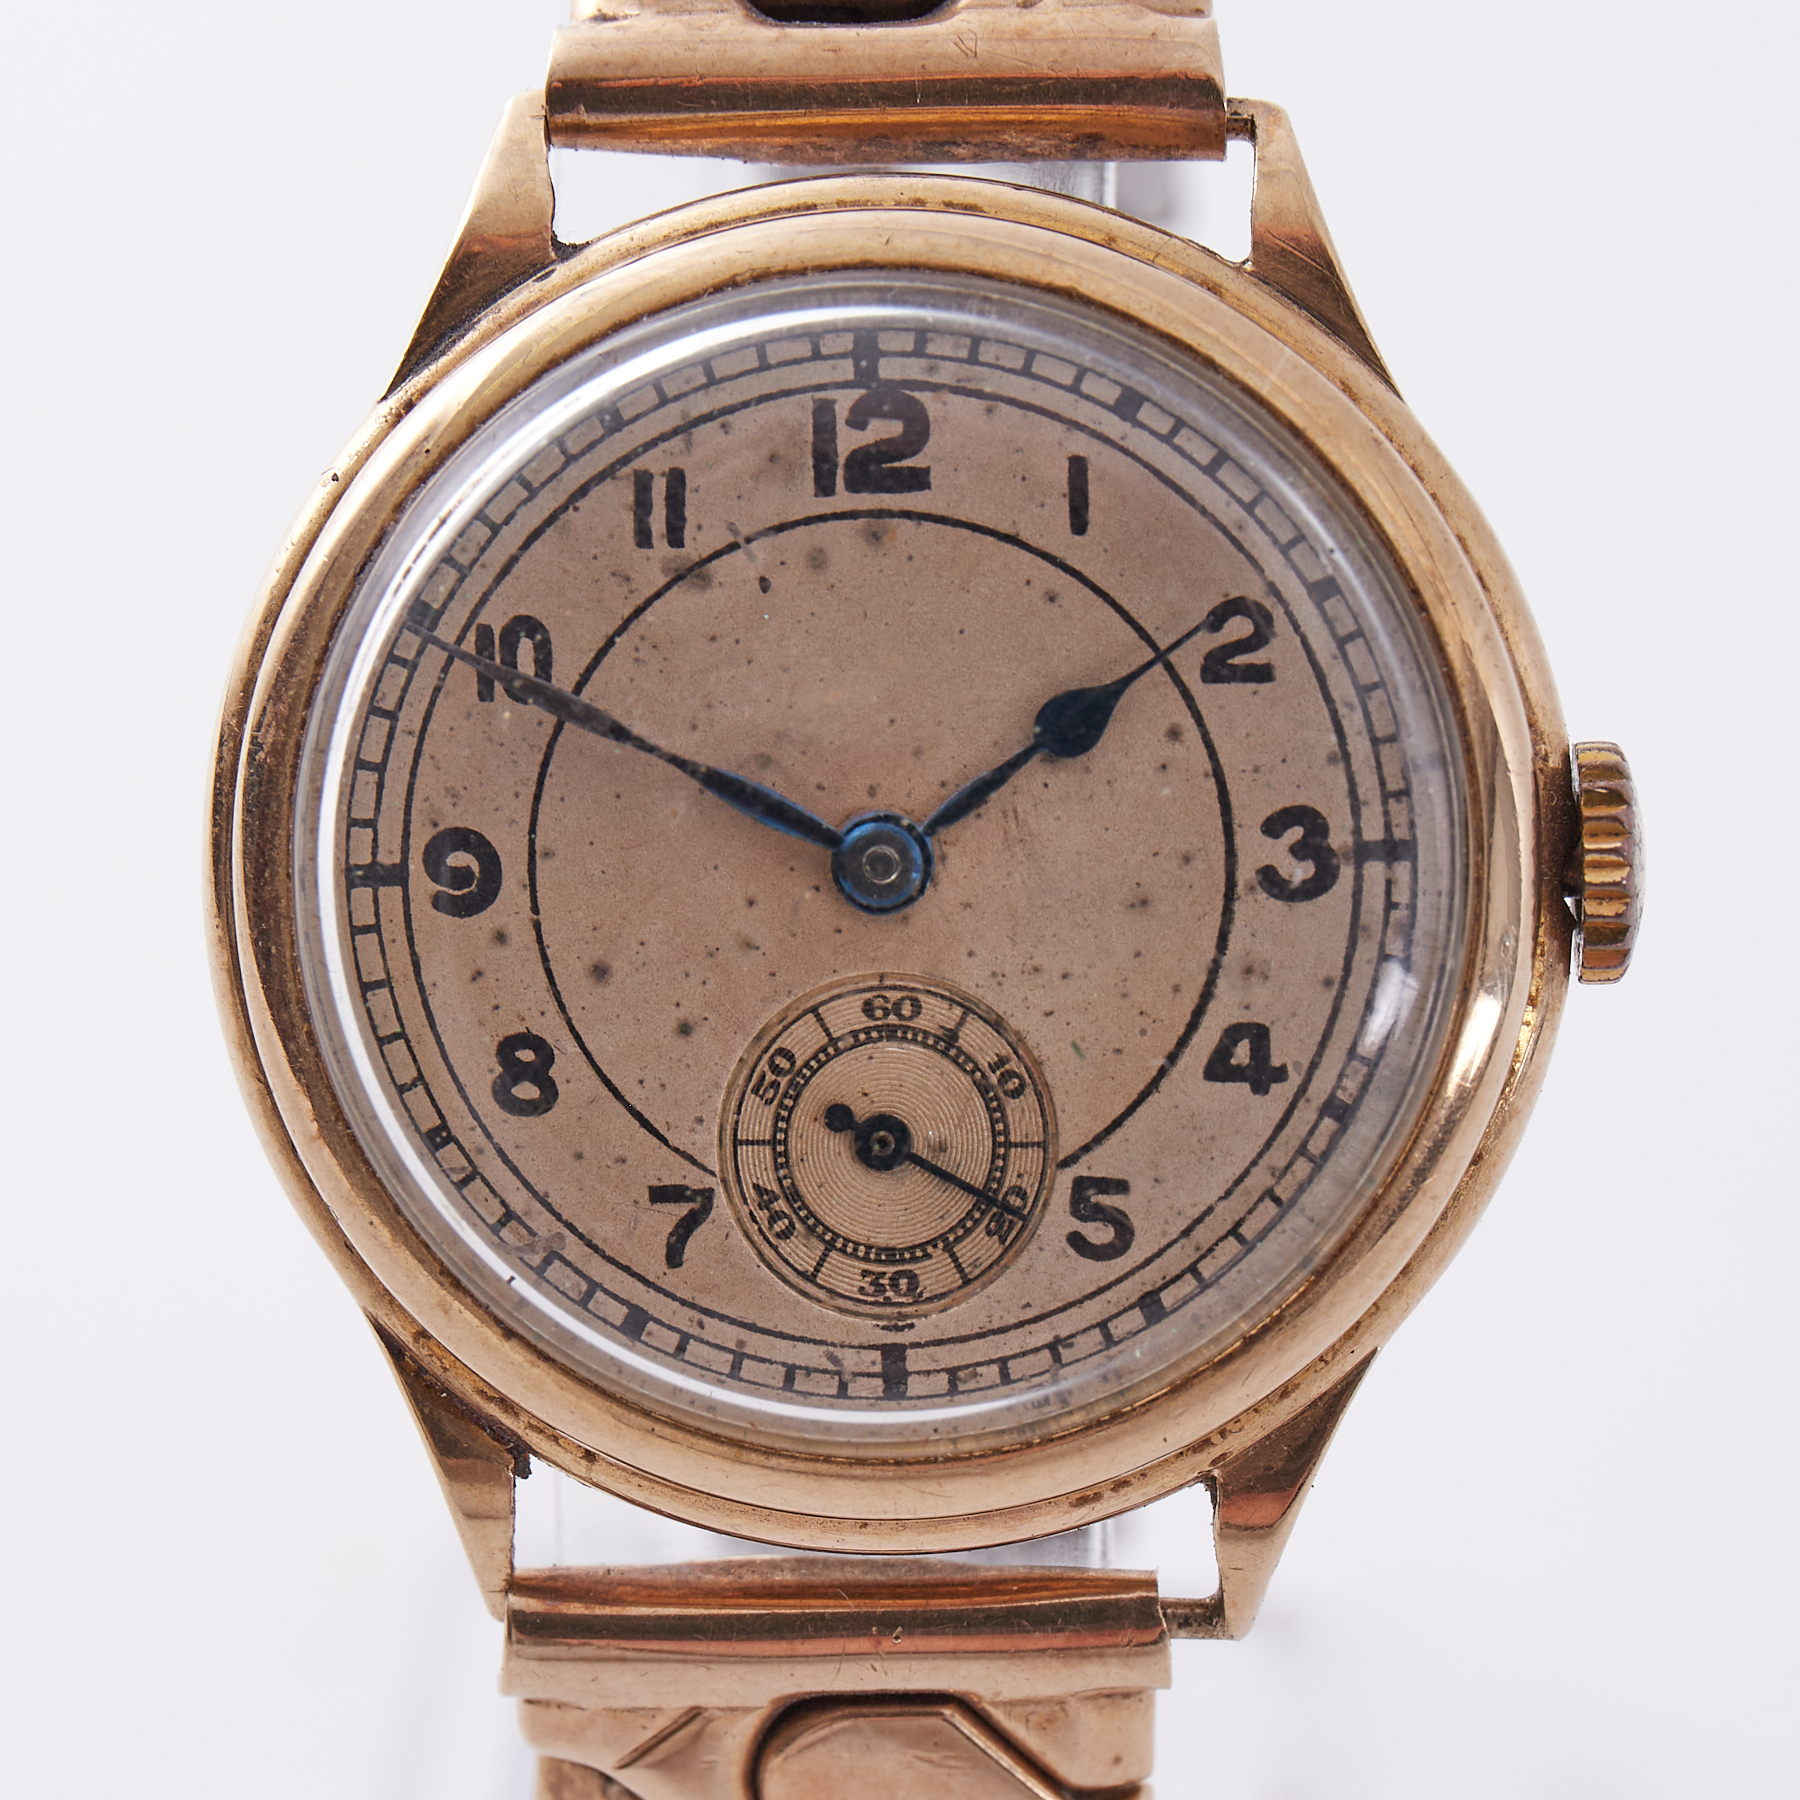 A 9ct gold vintage wristwatch engraved on the back 'Presented to Col W T Woods by the Officials of